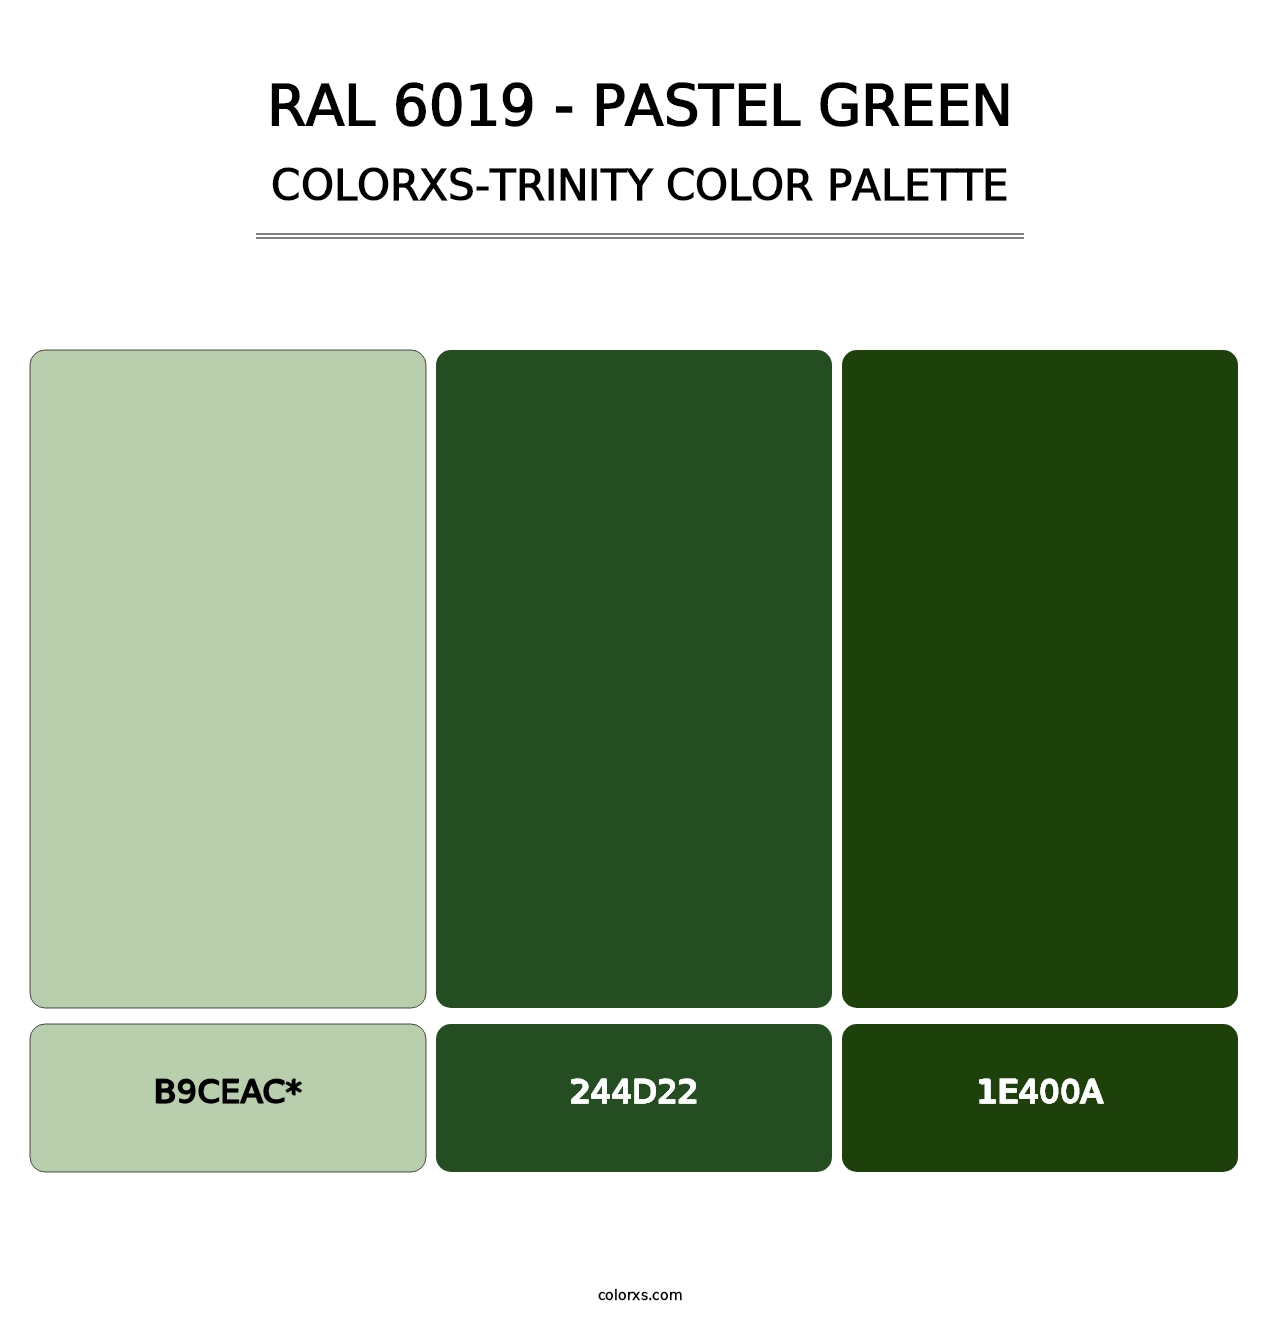 RAL 6019 - Pastel Green - Colorxs Trinity Palette